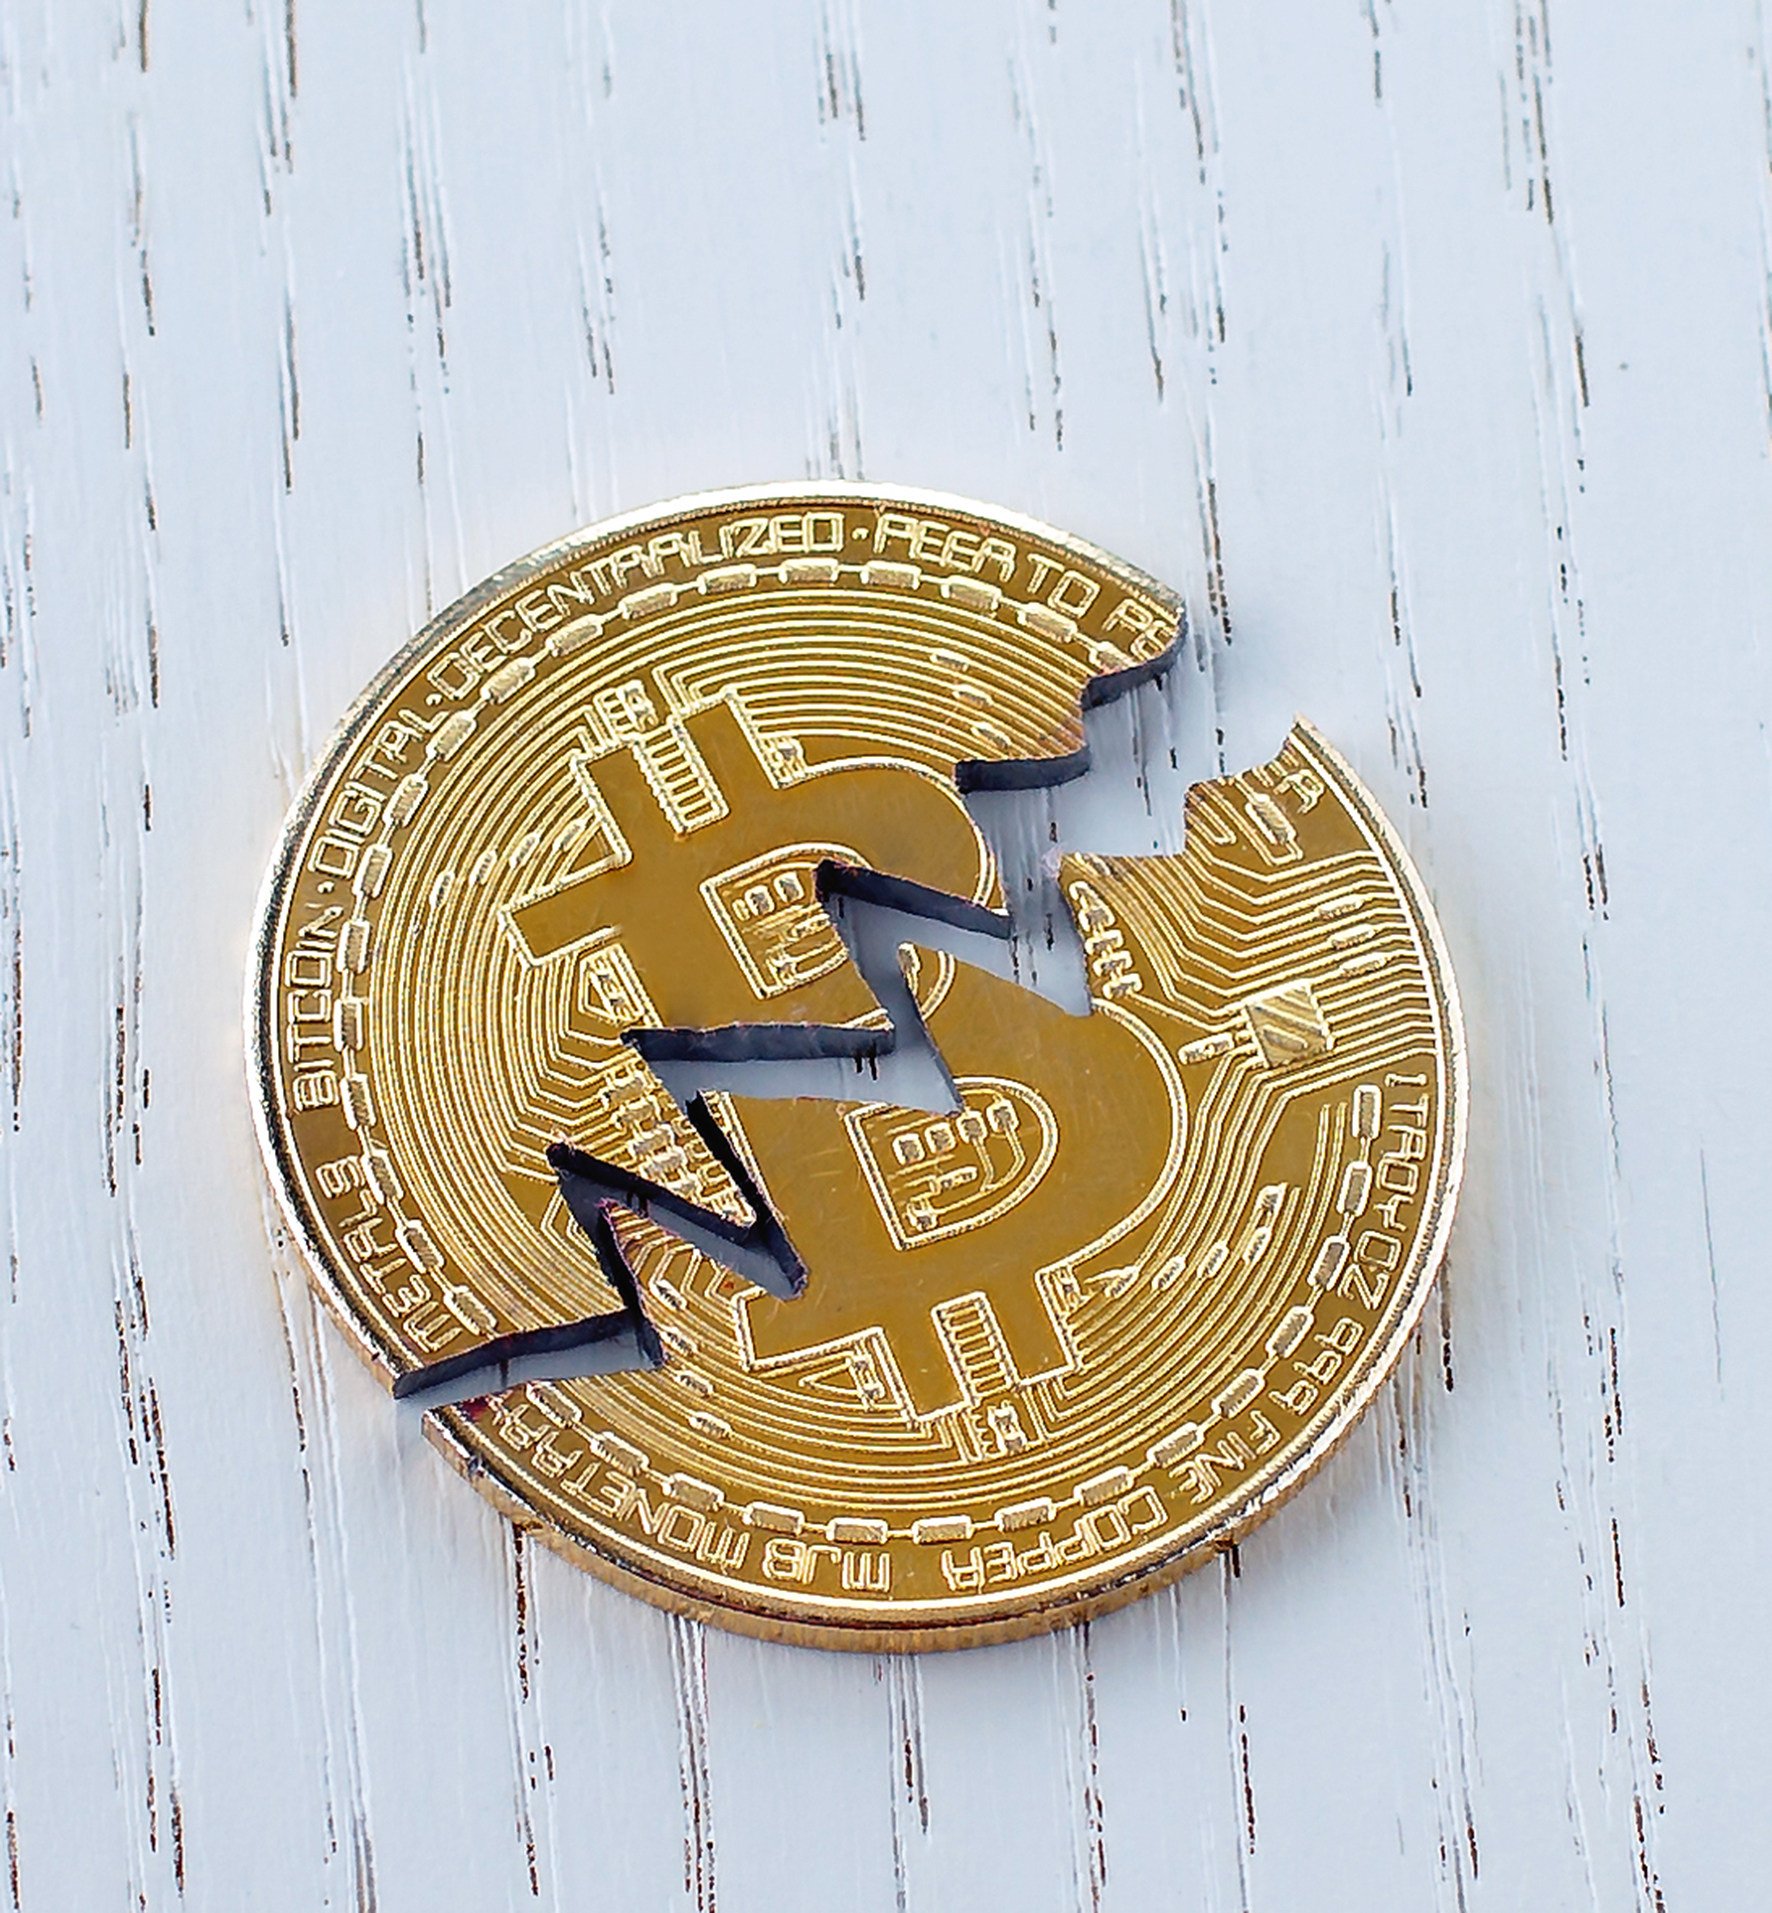 Volatility has long been a feature of cryptocurrency markets but even bitcoin is at levels not seen since 2020. Photo: Shutterstock